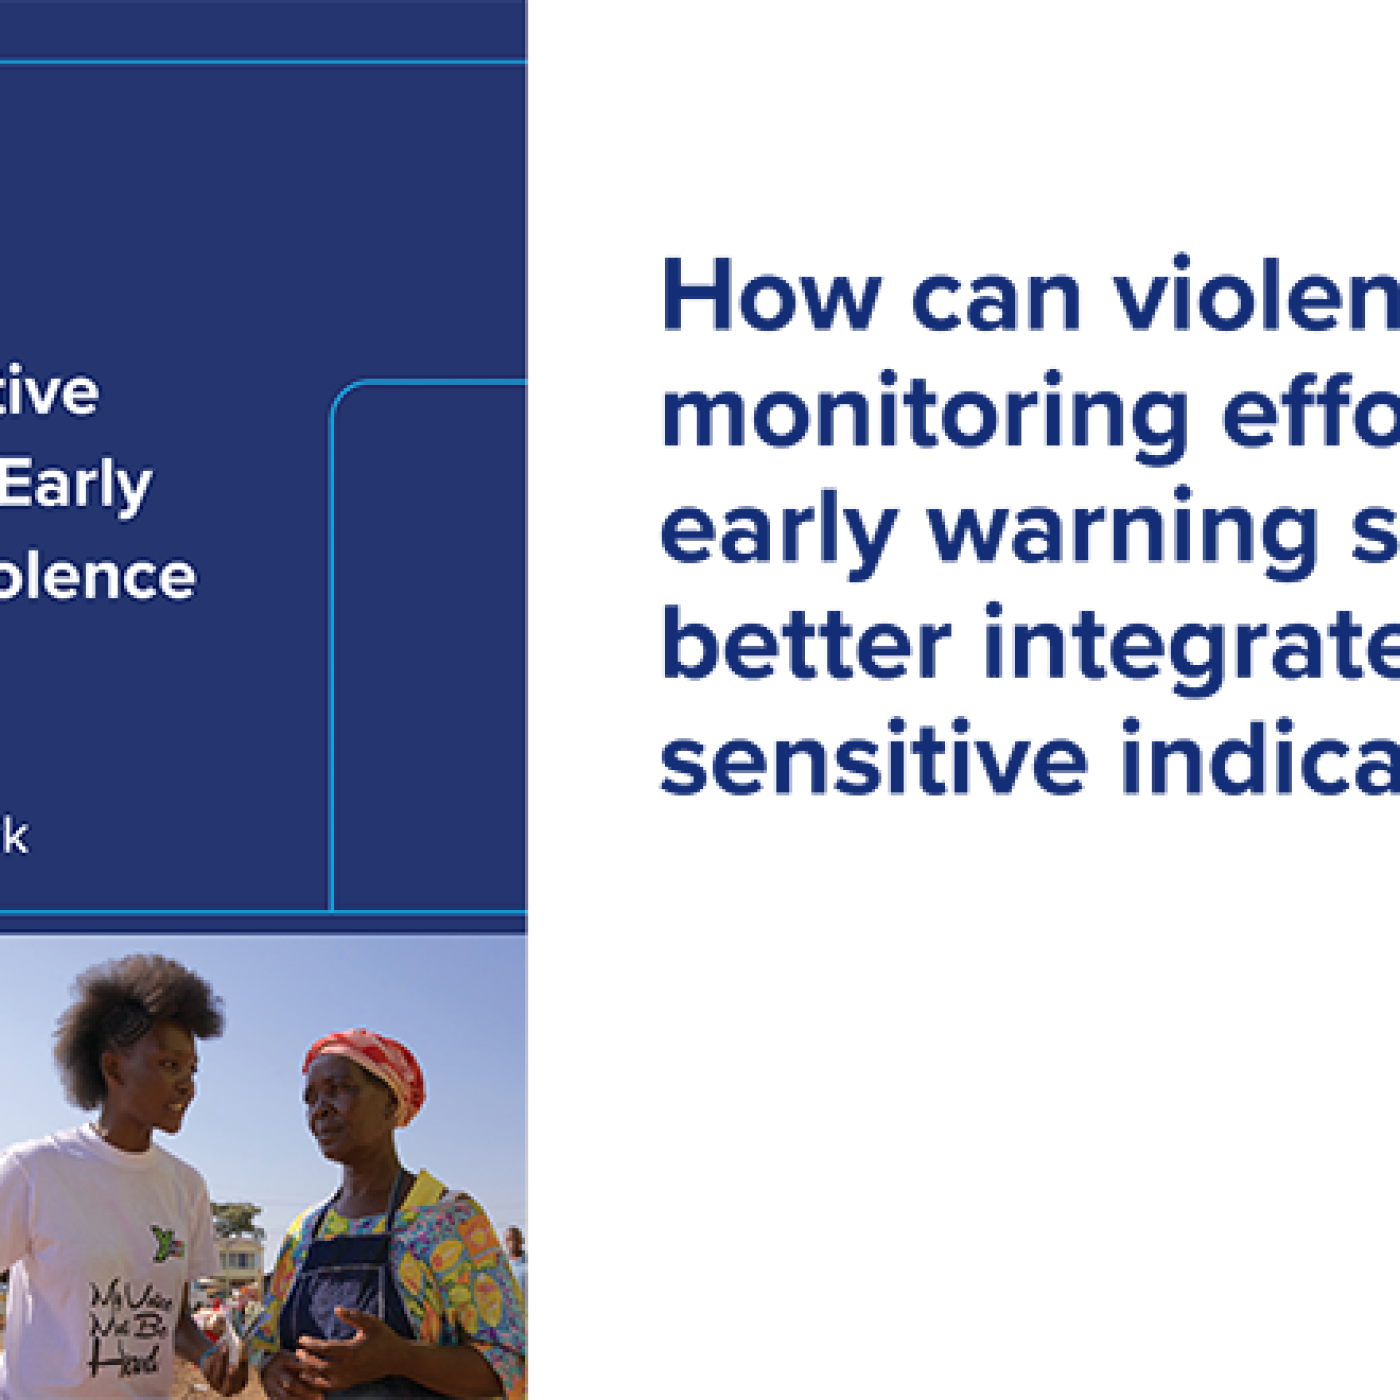 How can violence monitoring efforts and early warning systems better integrate gender-sensitive indicators?